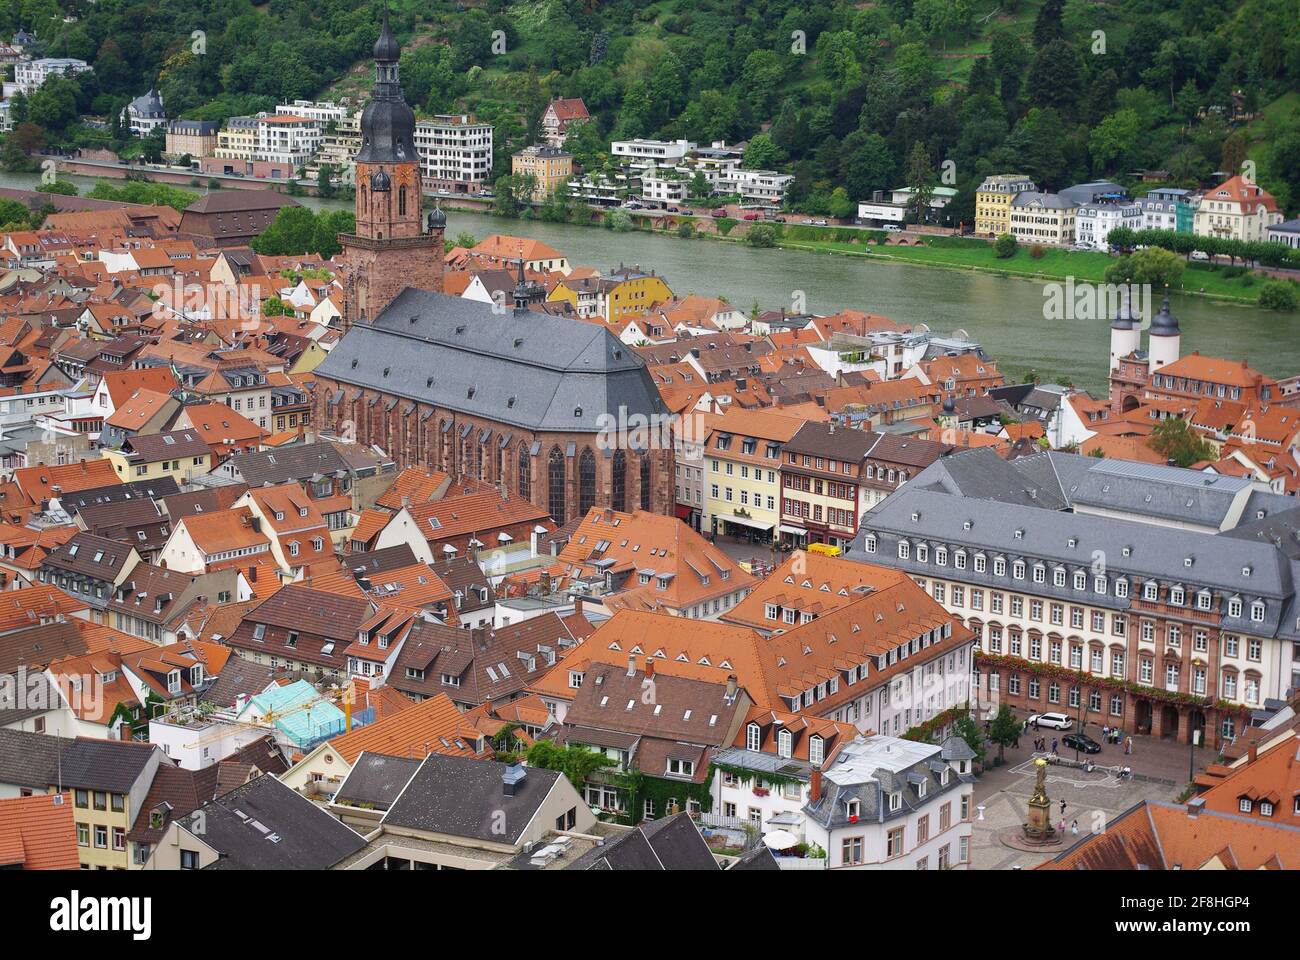 Aerial view including Church of the Holy Spirit and the old bridge gate’s twin towers taken from the castle, Heidelberg, Baden-Württemberg, Germany Stock Photo